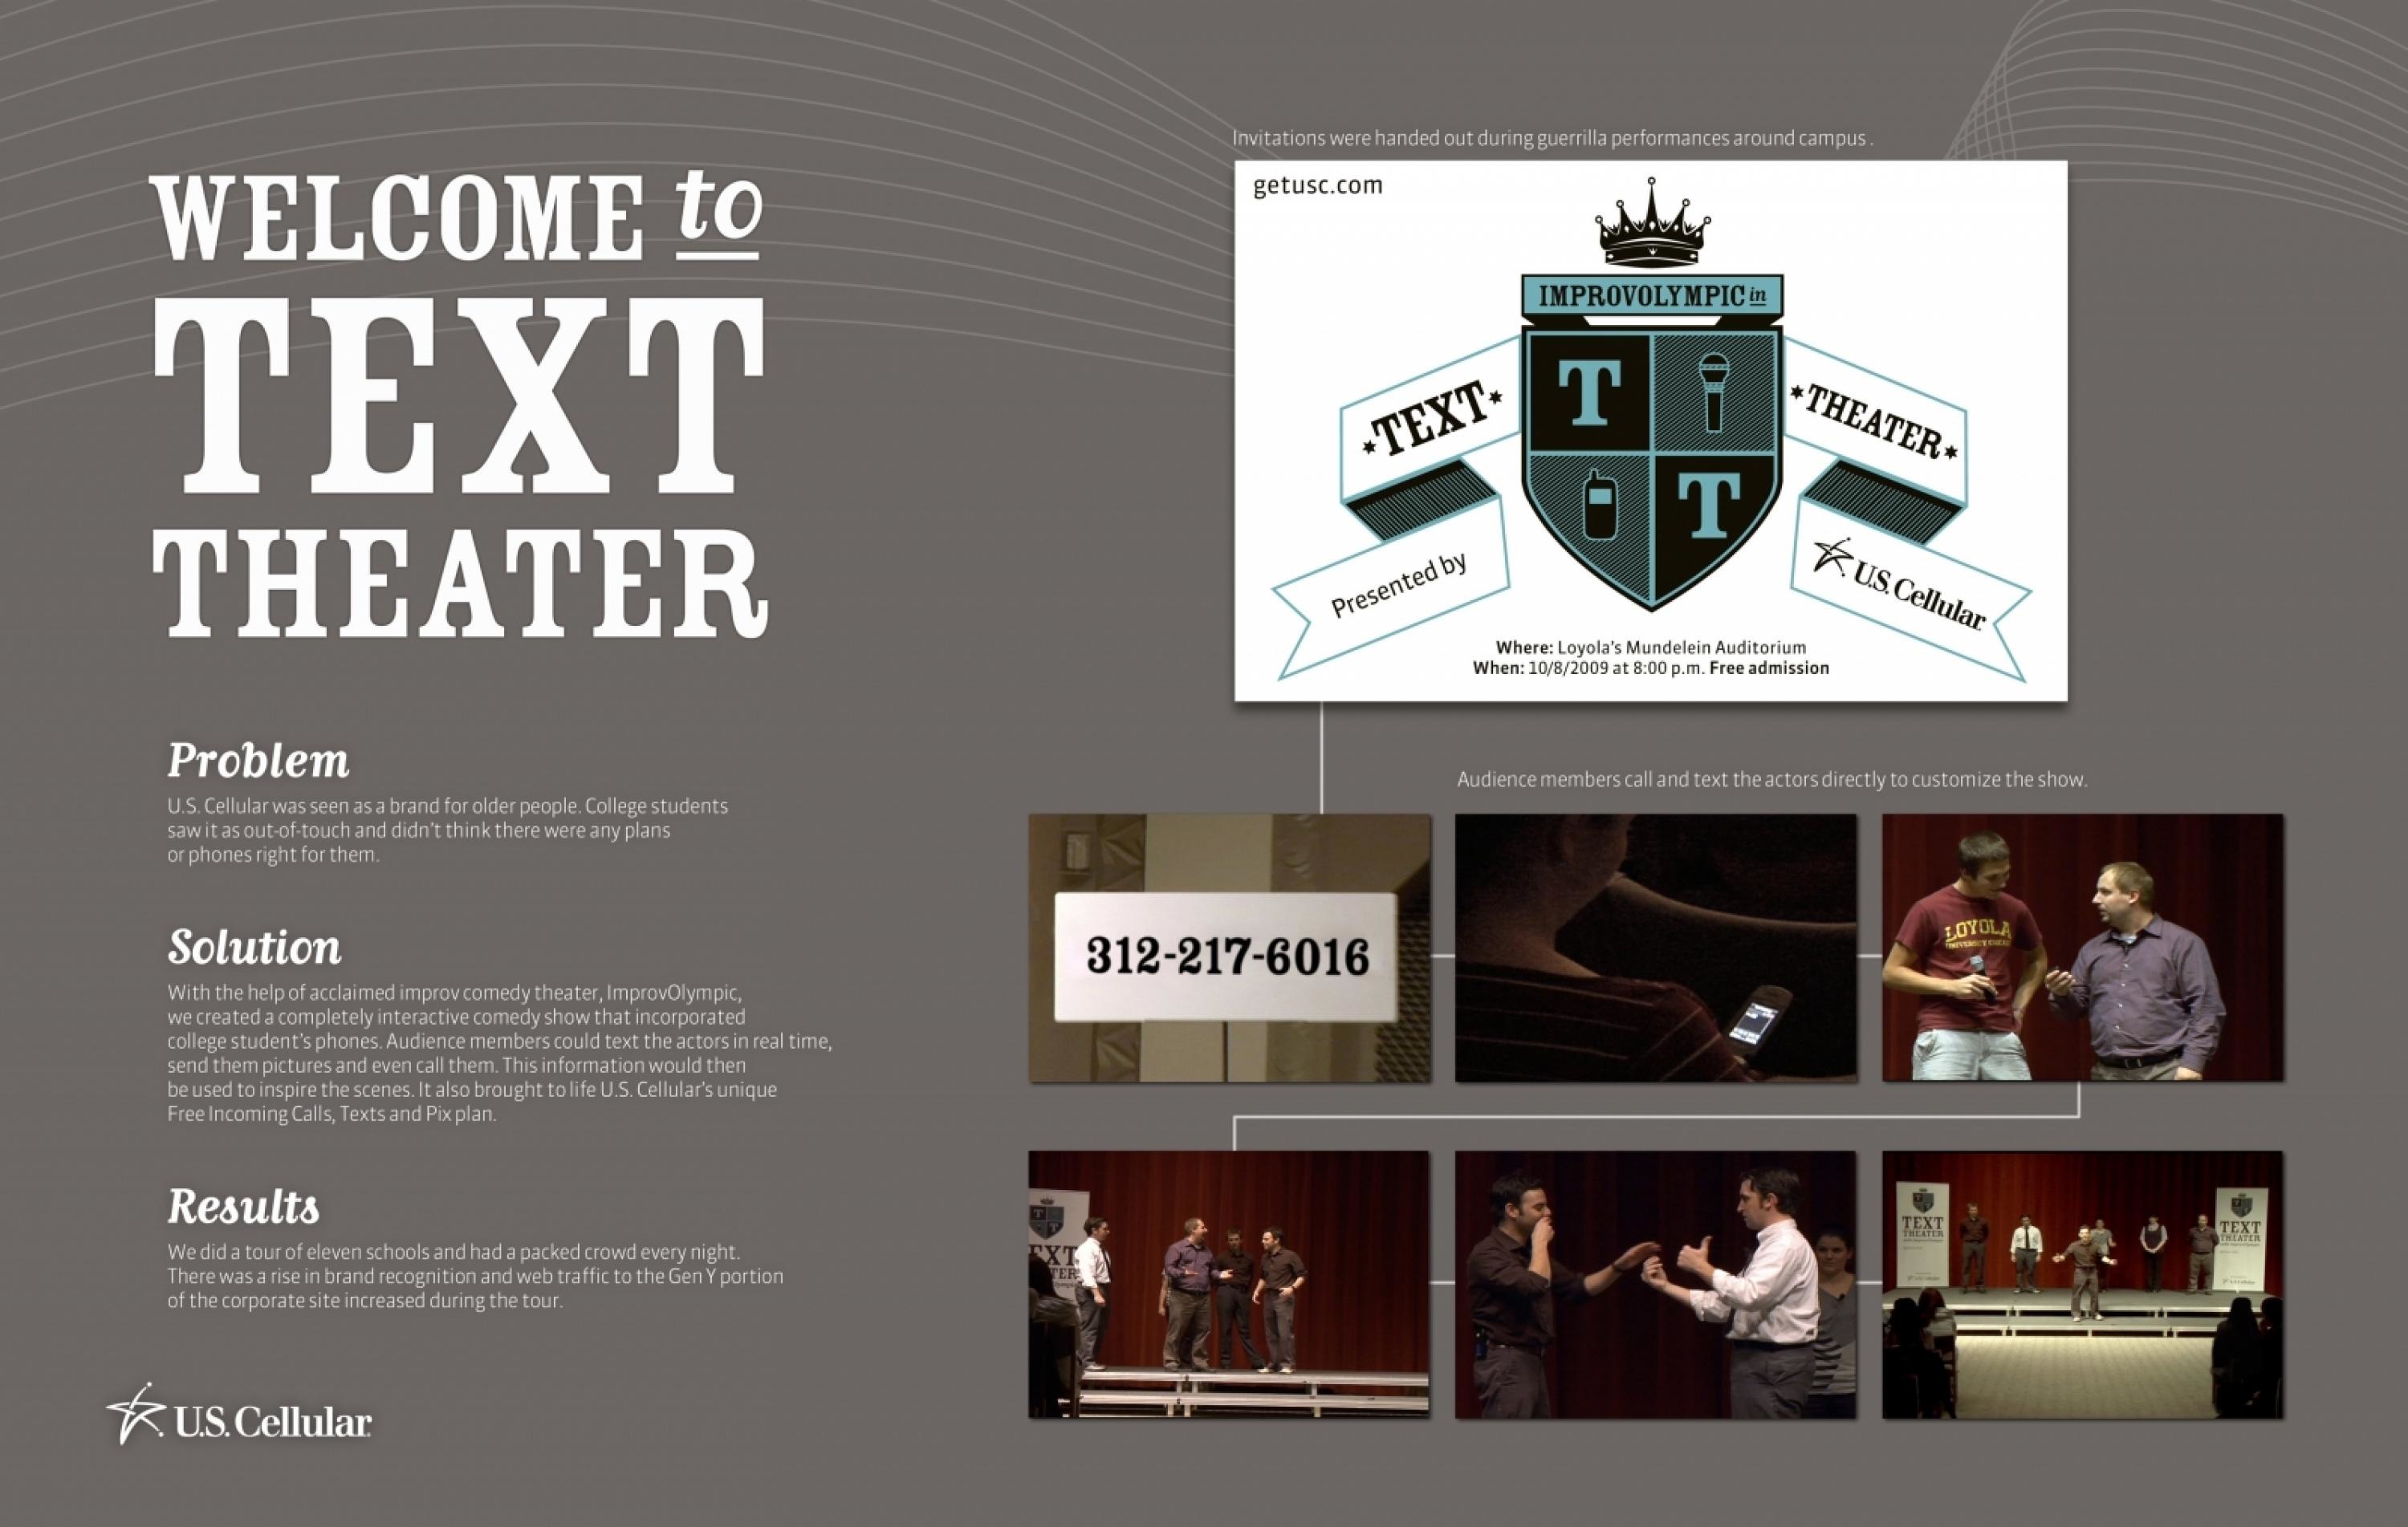 TEXT THEATER